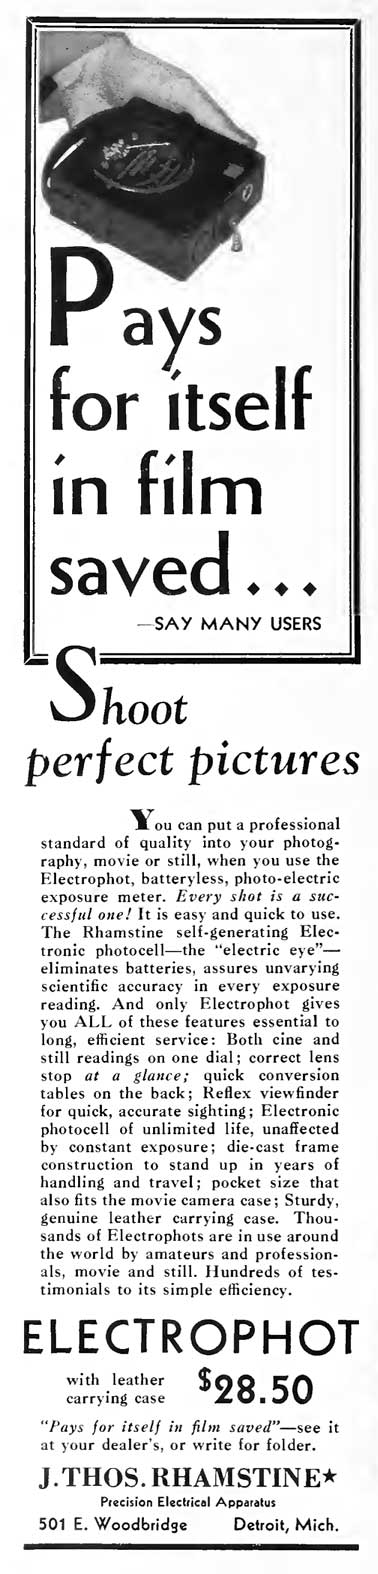 Electrophot M-S ad 1933